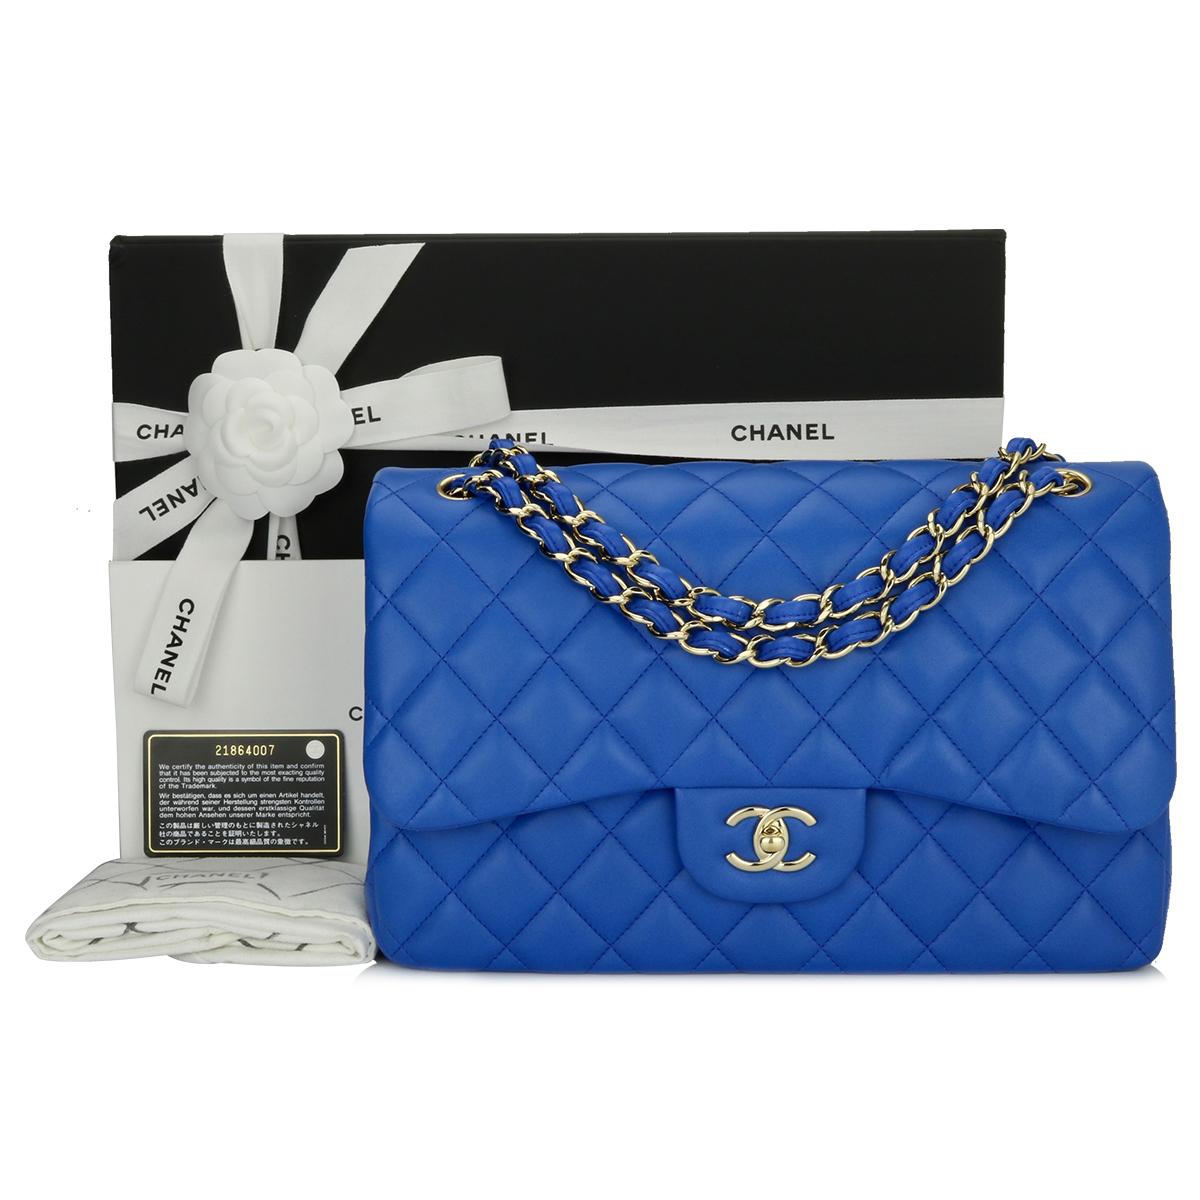 Authentic CHANEL Classic Double Flap Jumbo Bag Blue Lambskin with Light Gold Hardware 2016.

This stunning bag is in a brand new condition, the bag still holds its original shape, and the hardware is still very shiny. The leather smells fresh as if